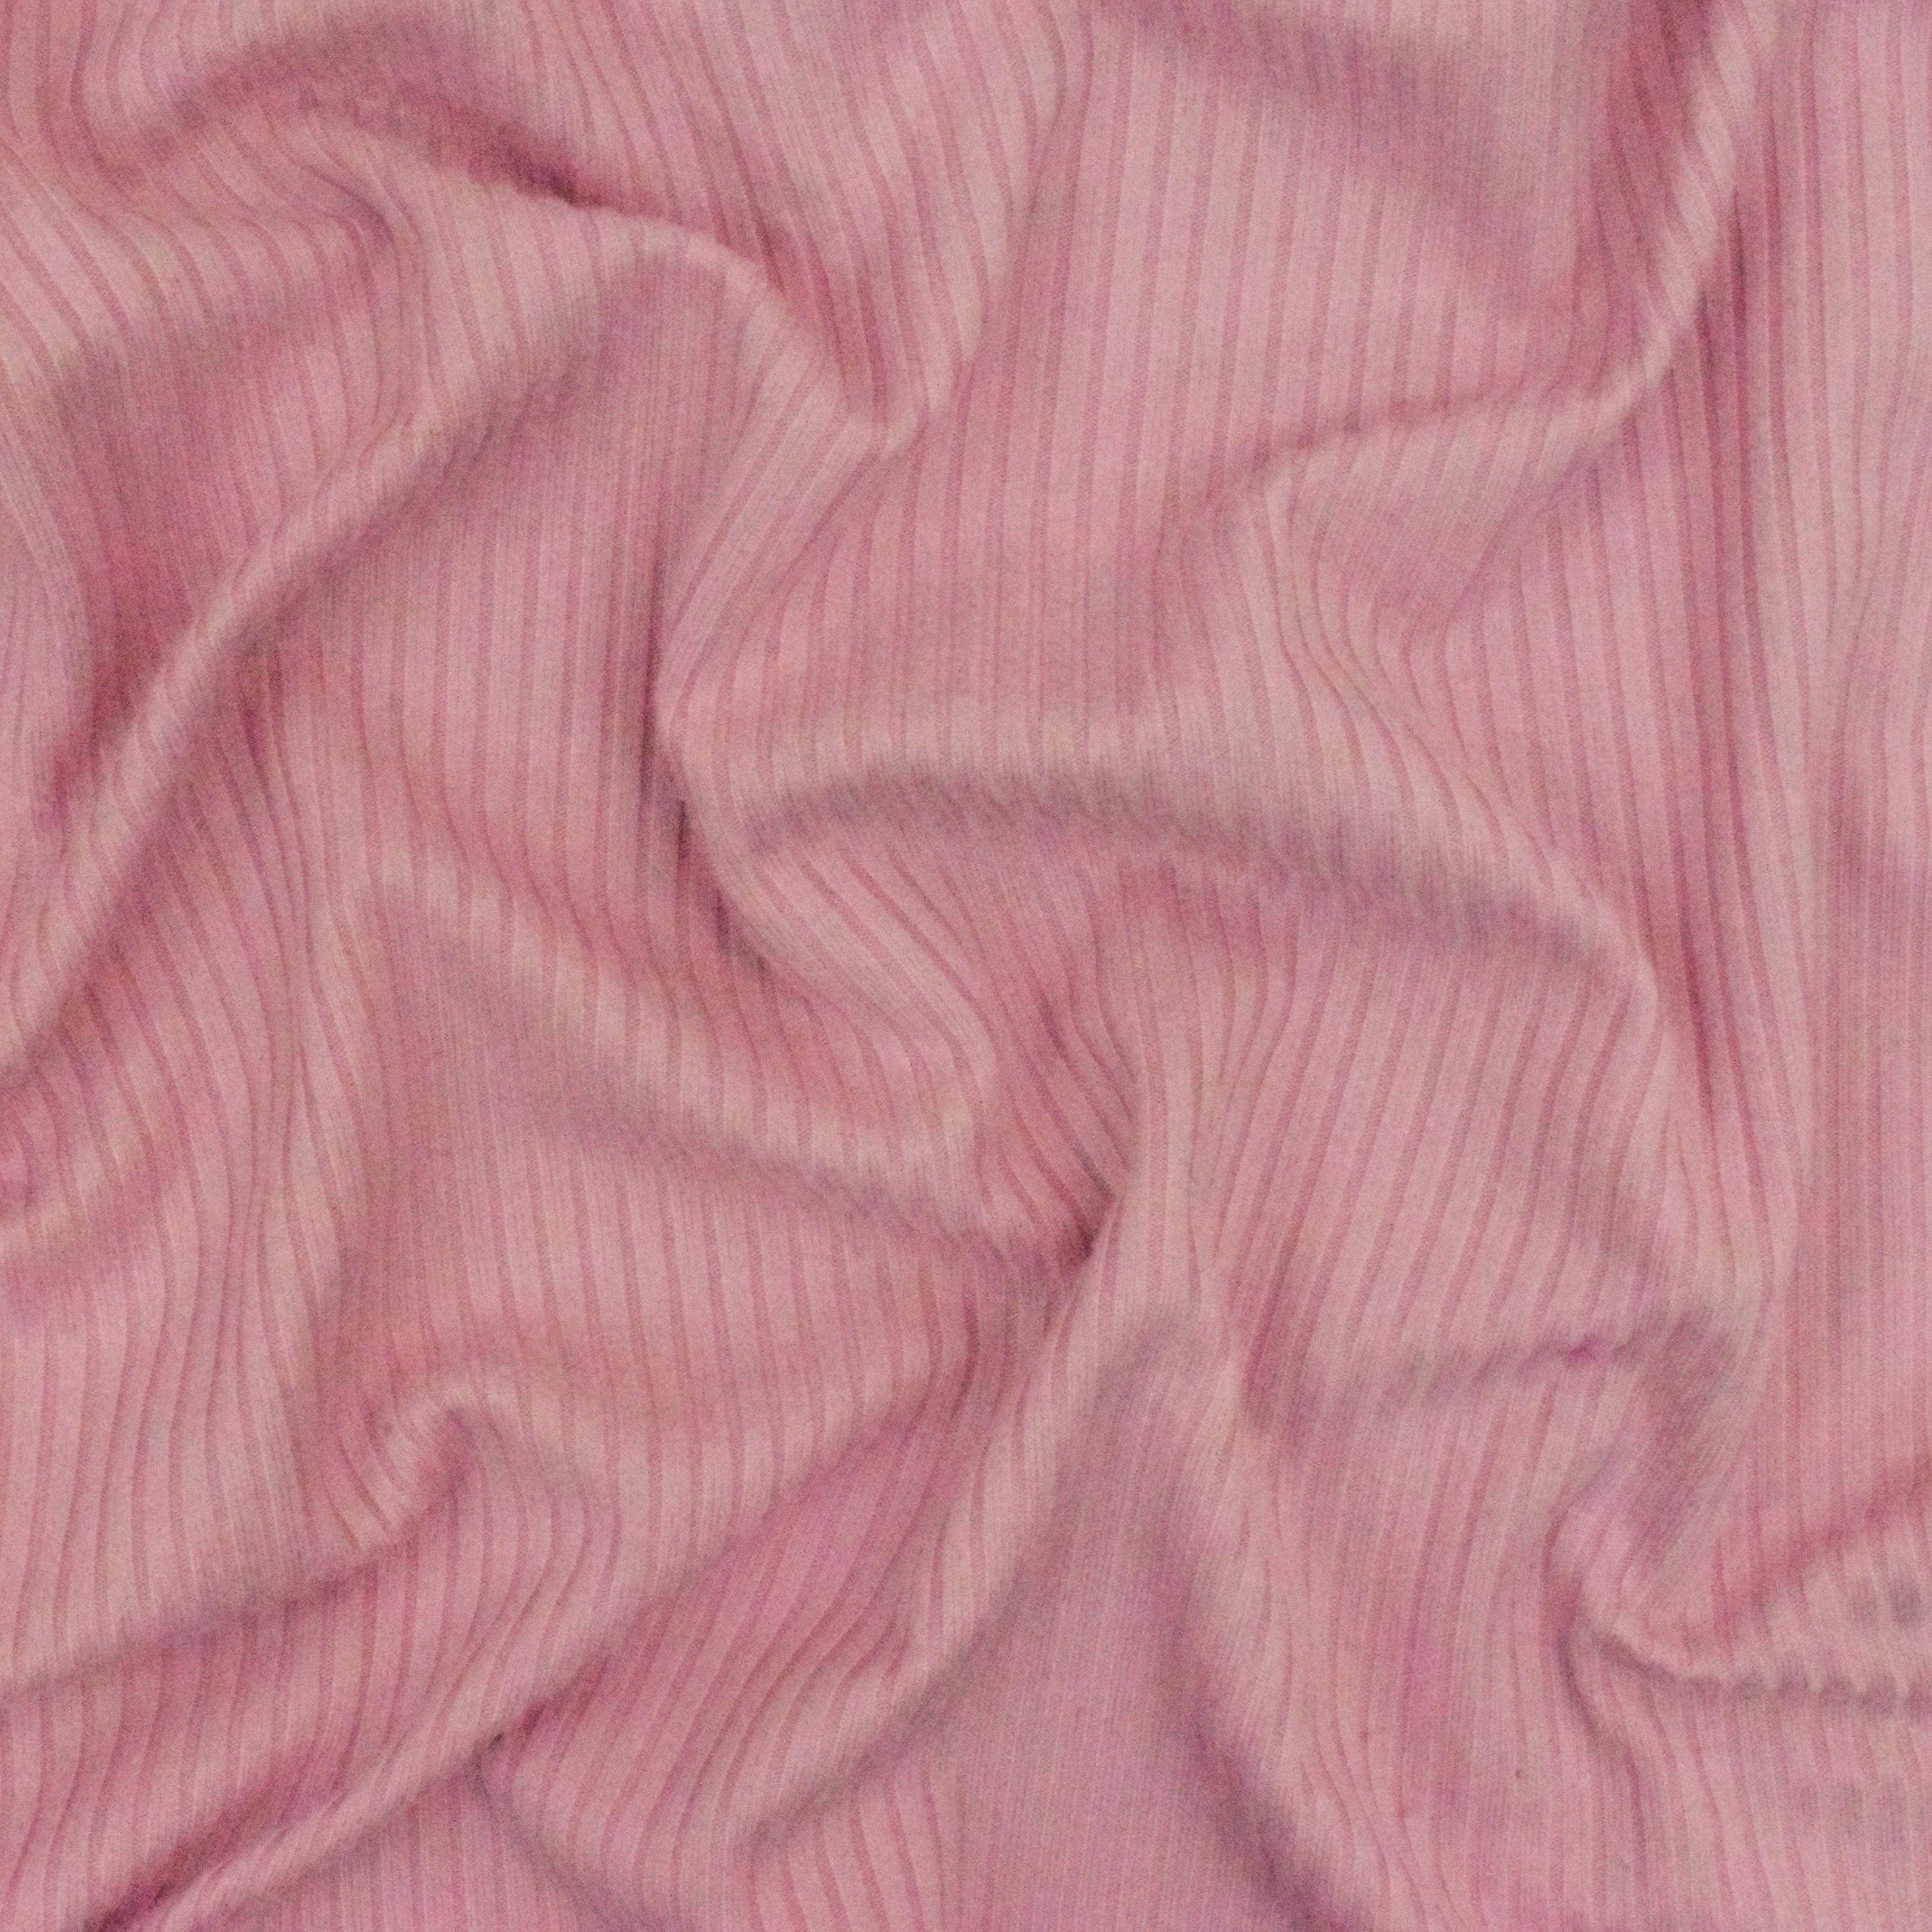 Pink #S/XY Polyester Interlock Knit Fabric - SKU 2519A — Nick Of Time  Textiles